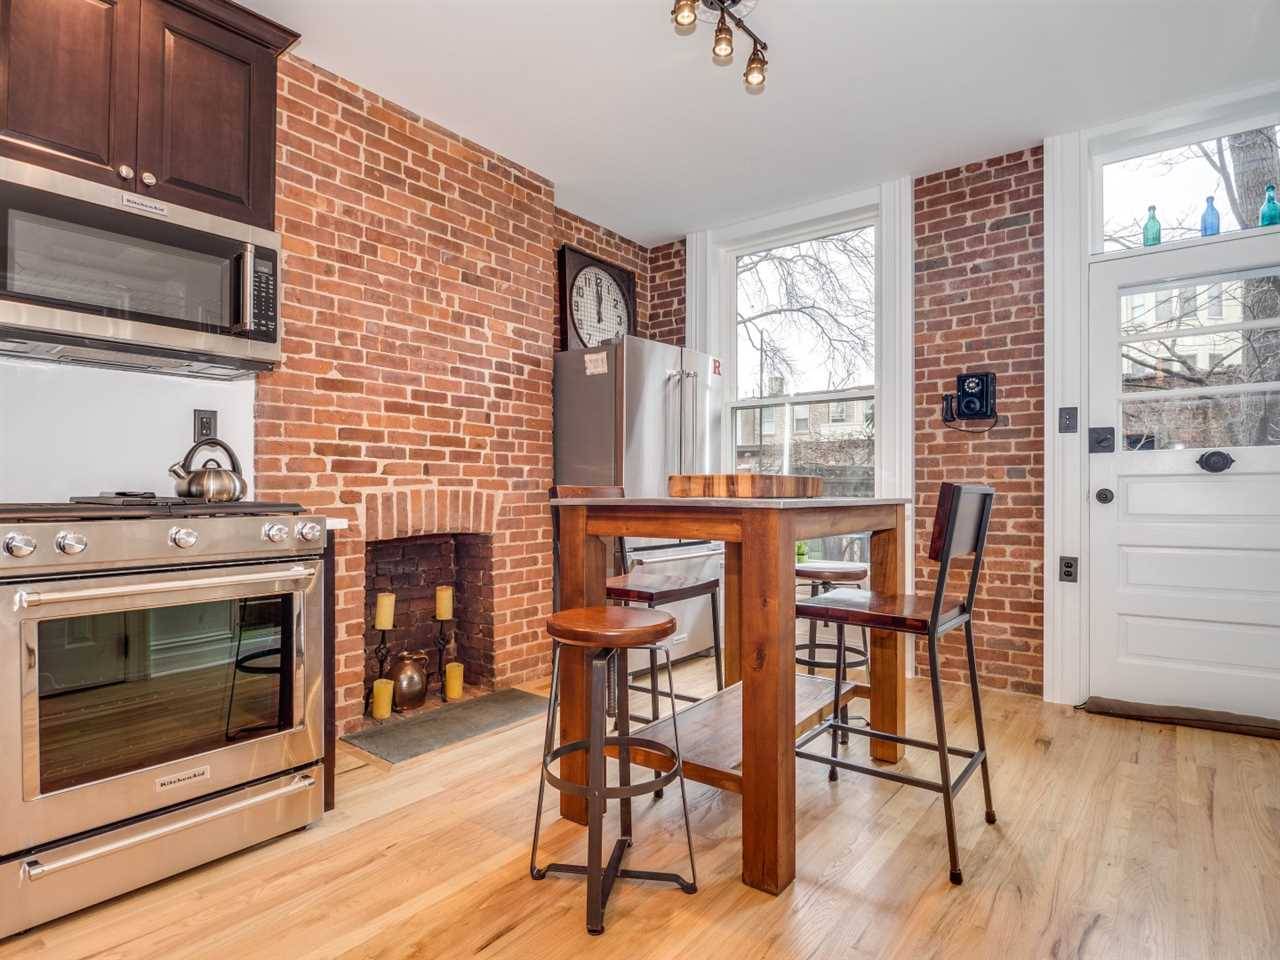 This home has it all - 1 BR Condo Historic Downtown New Jersey